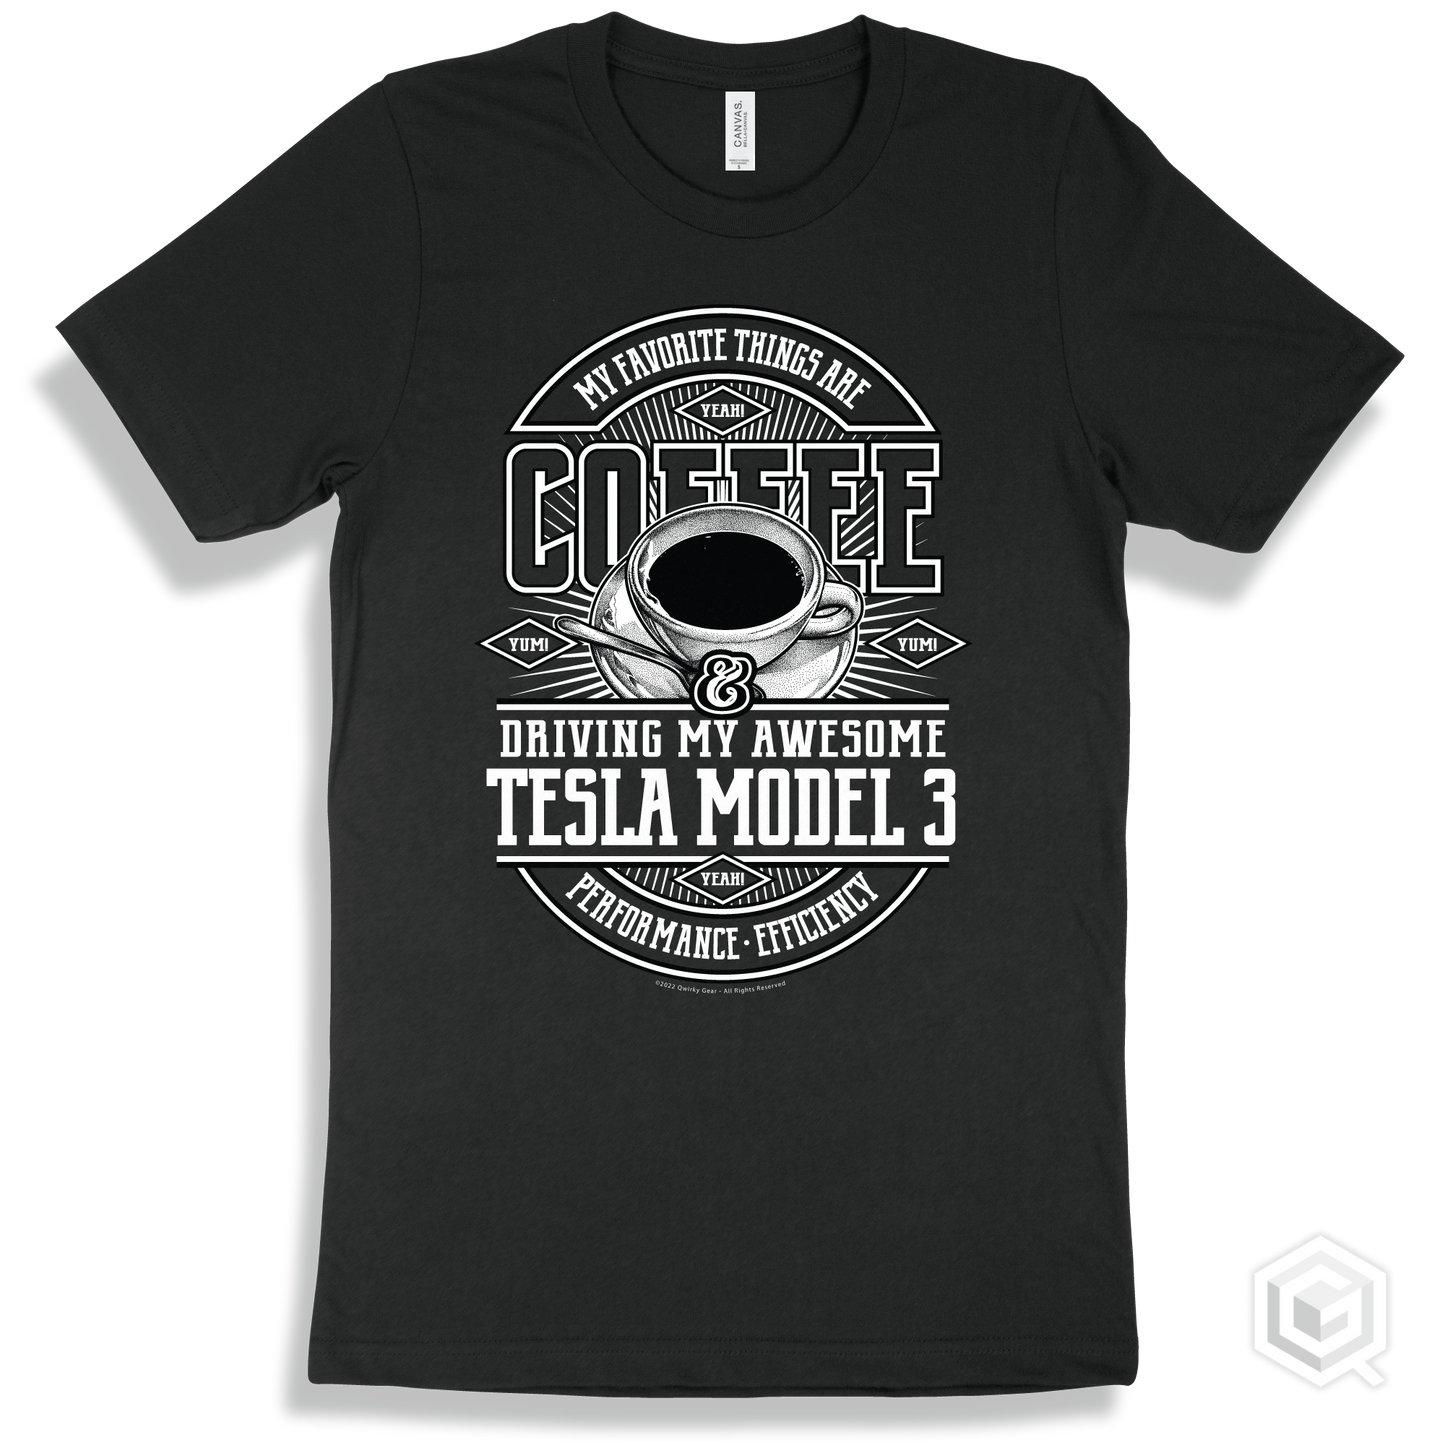 Black T-shirt - My Favorite Things Are Coffee and Driving My Awesome Tesla Model 3 Design